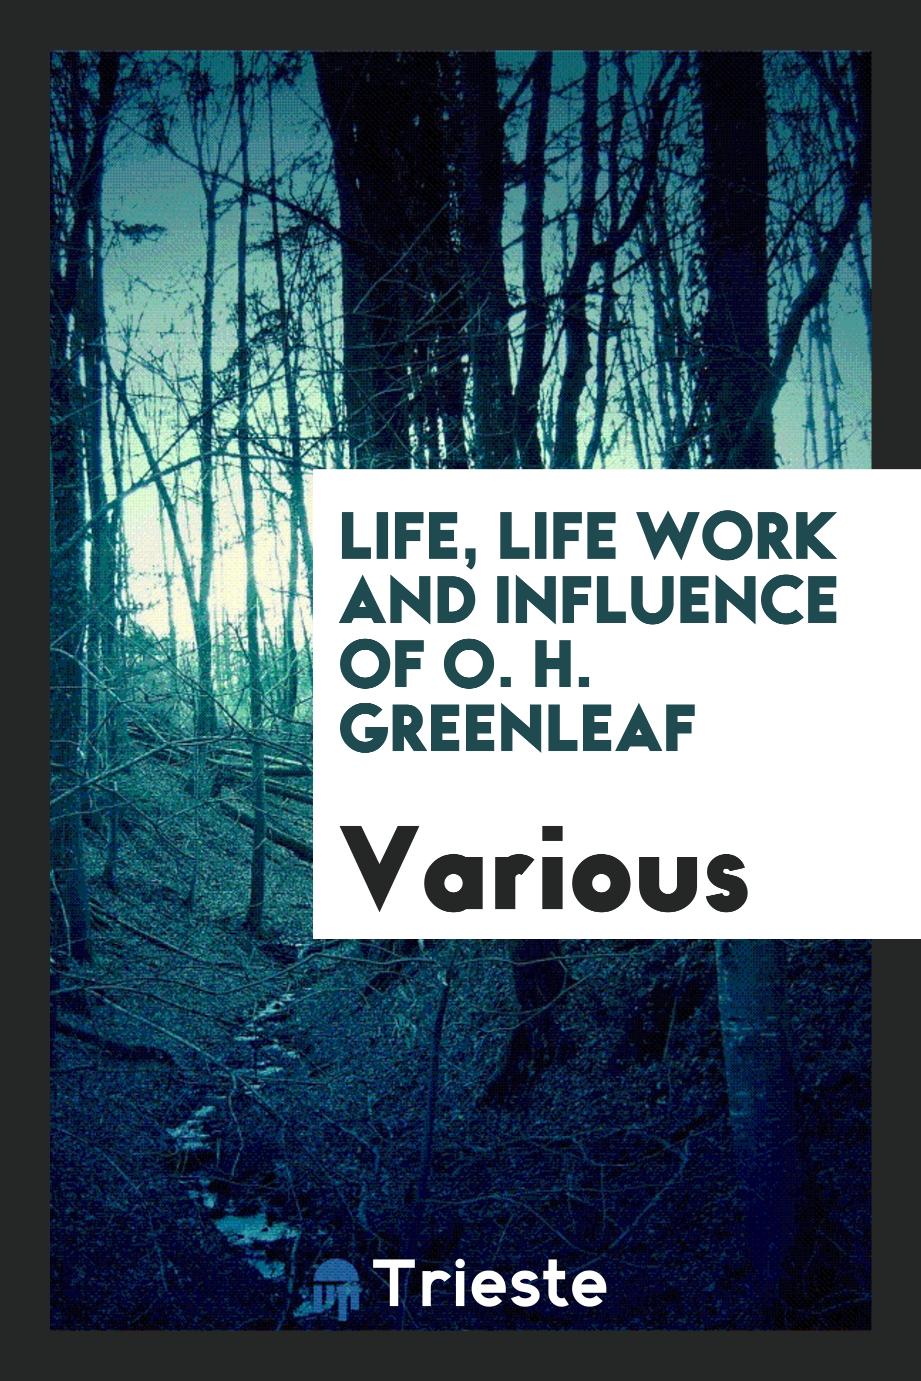 Life, Life Work and Influence of O. H. Greenleaf